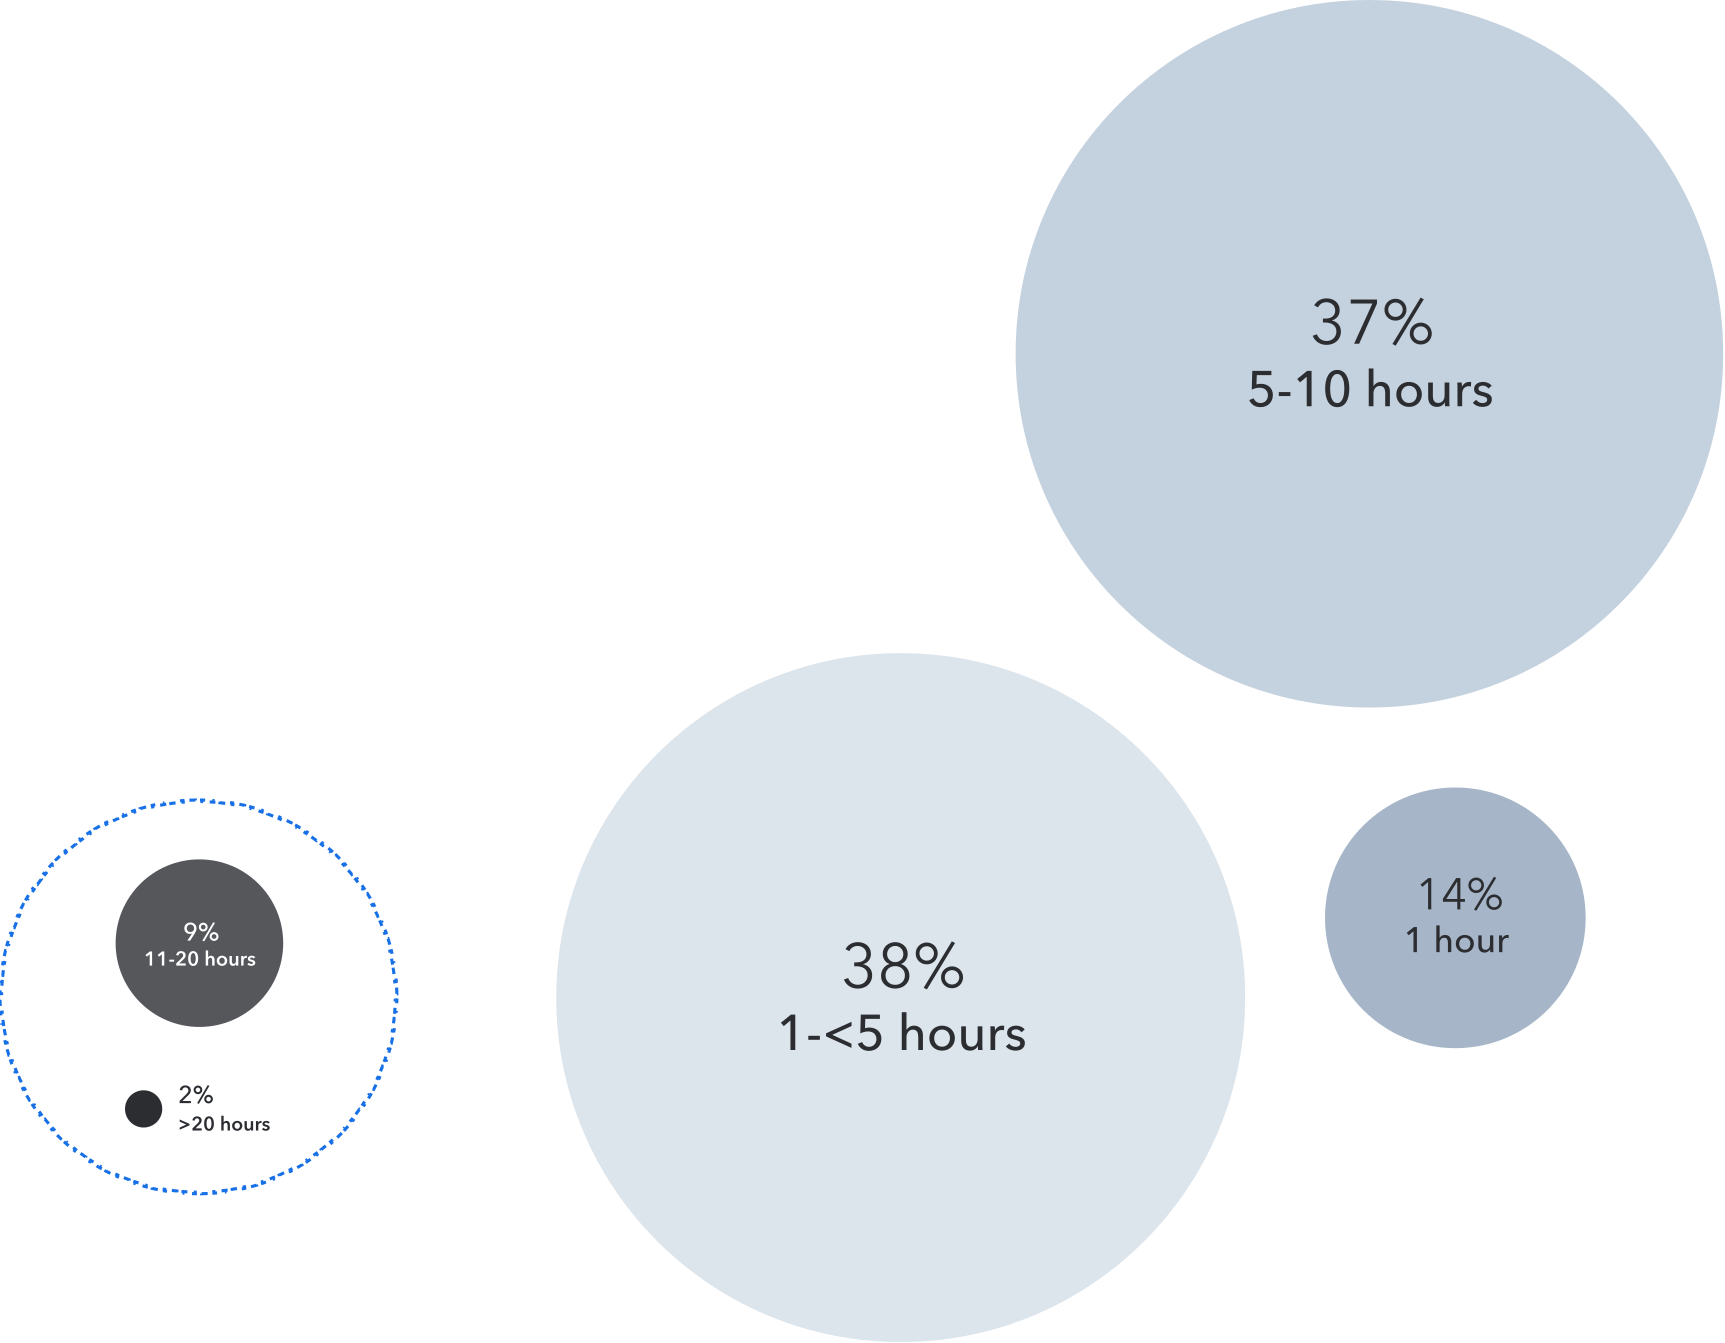 Thirty-eight percent of respondents say they save from one to almost five hours a week using generative AI tools; 37% save between five and 10 hours per week; and 11% save more than 10 hours per week.